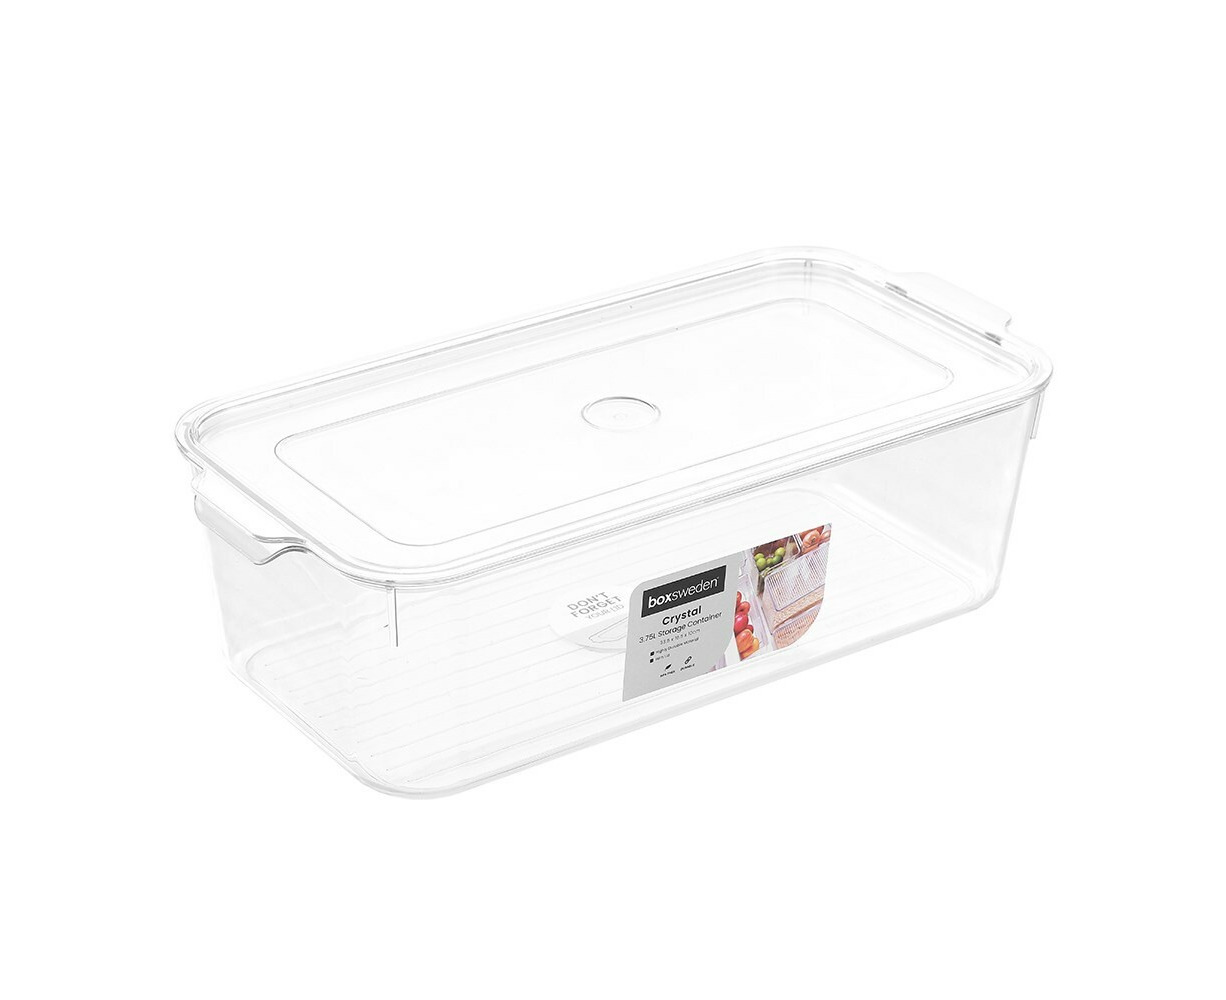 3PK Boxsweden Crystal 4L/21cm Pantry Storage Container - Clear